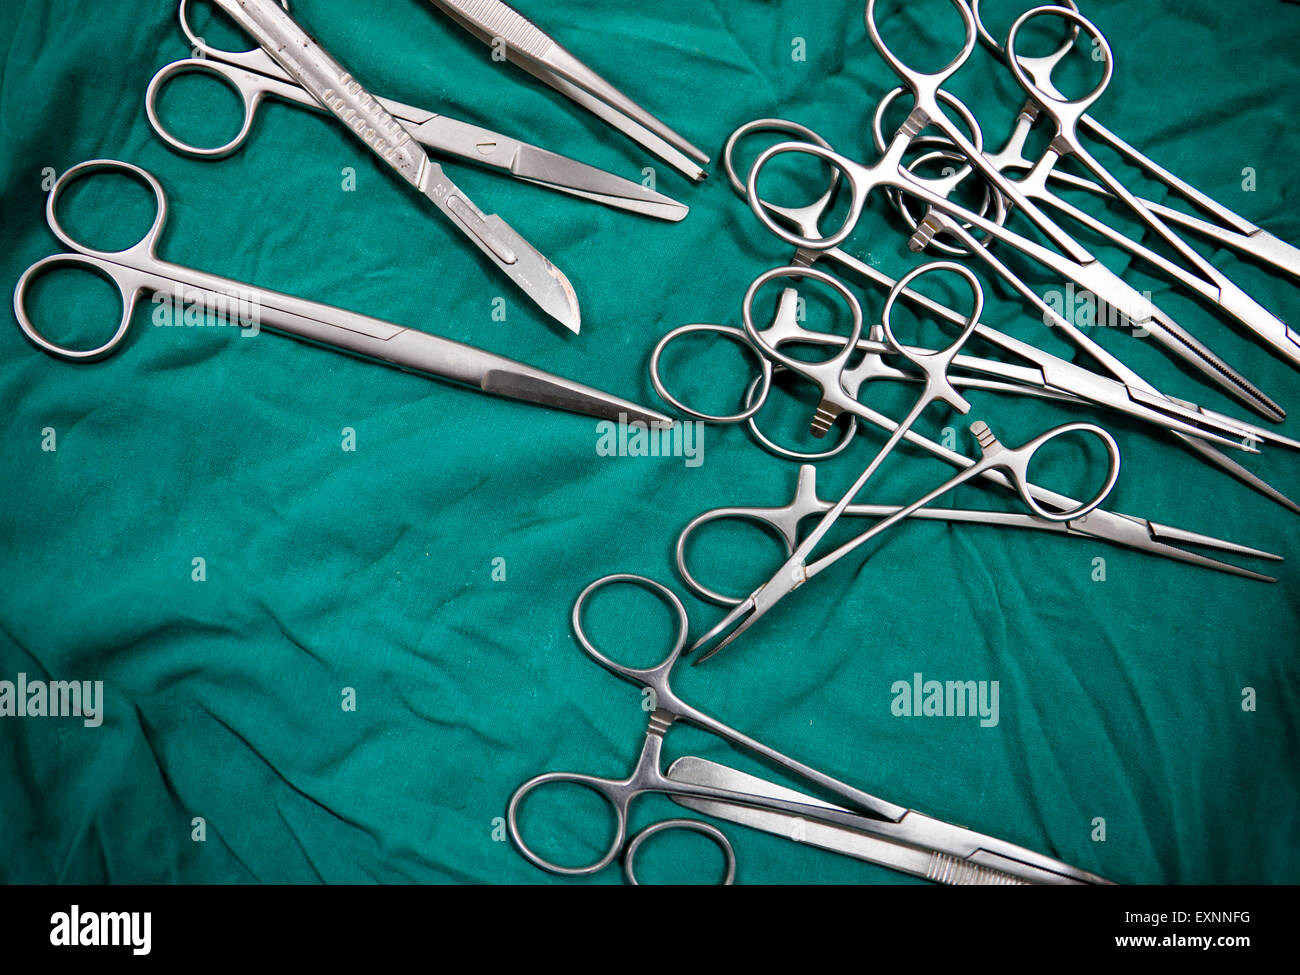 surgery equipment on table in the operating room Stock Photo